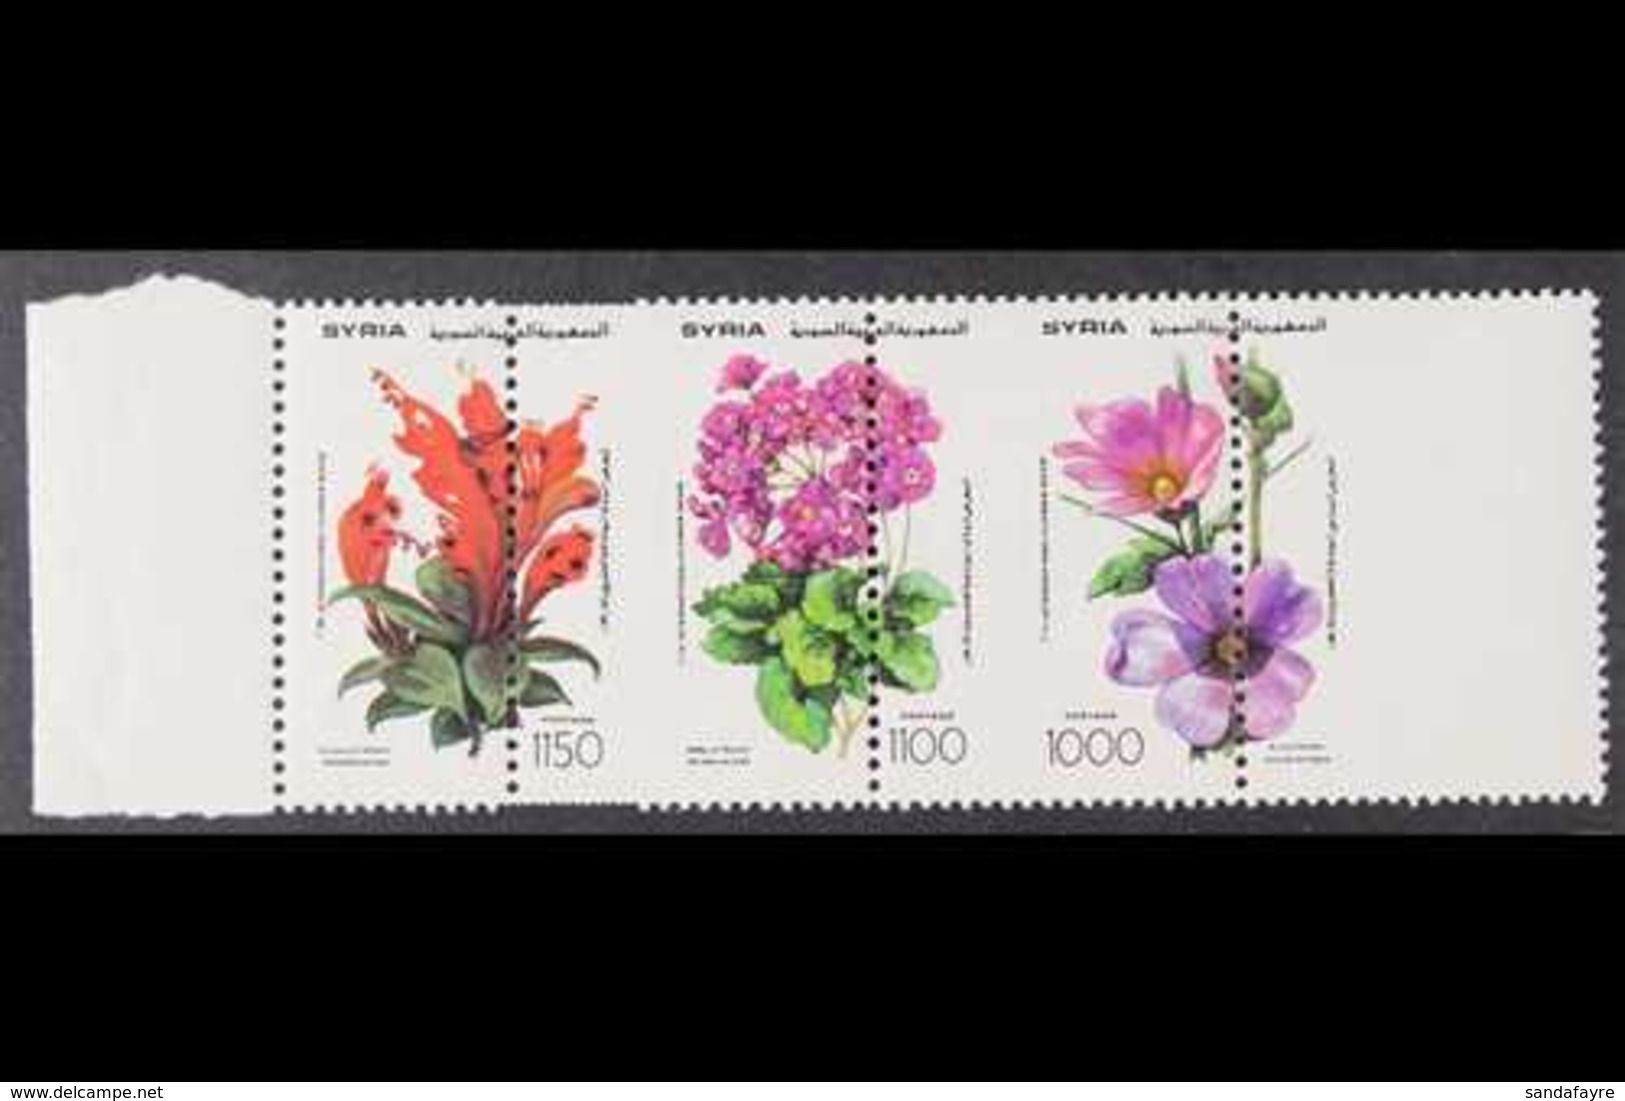 1993  Flower Show Se-tenant Strip Of Three (SG 1869a, Scott 1295), With Dramatic Vertical Perf Shift, Never Hinged Mint. - Syrië